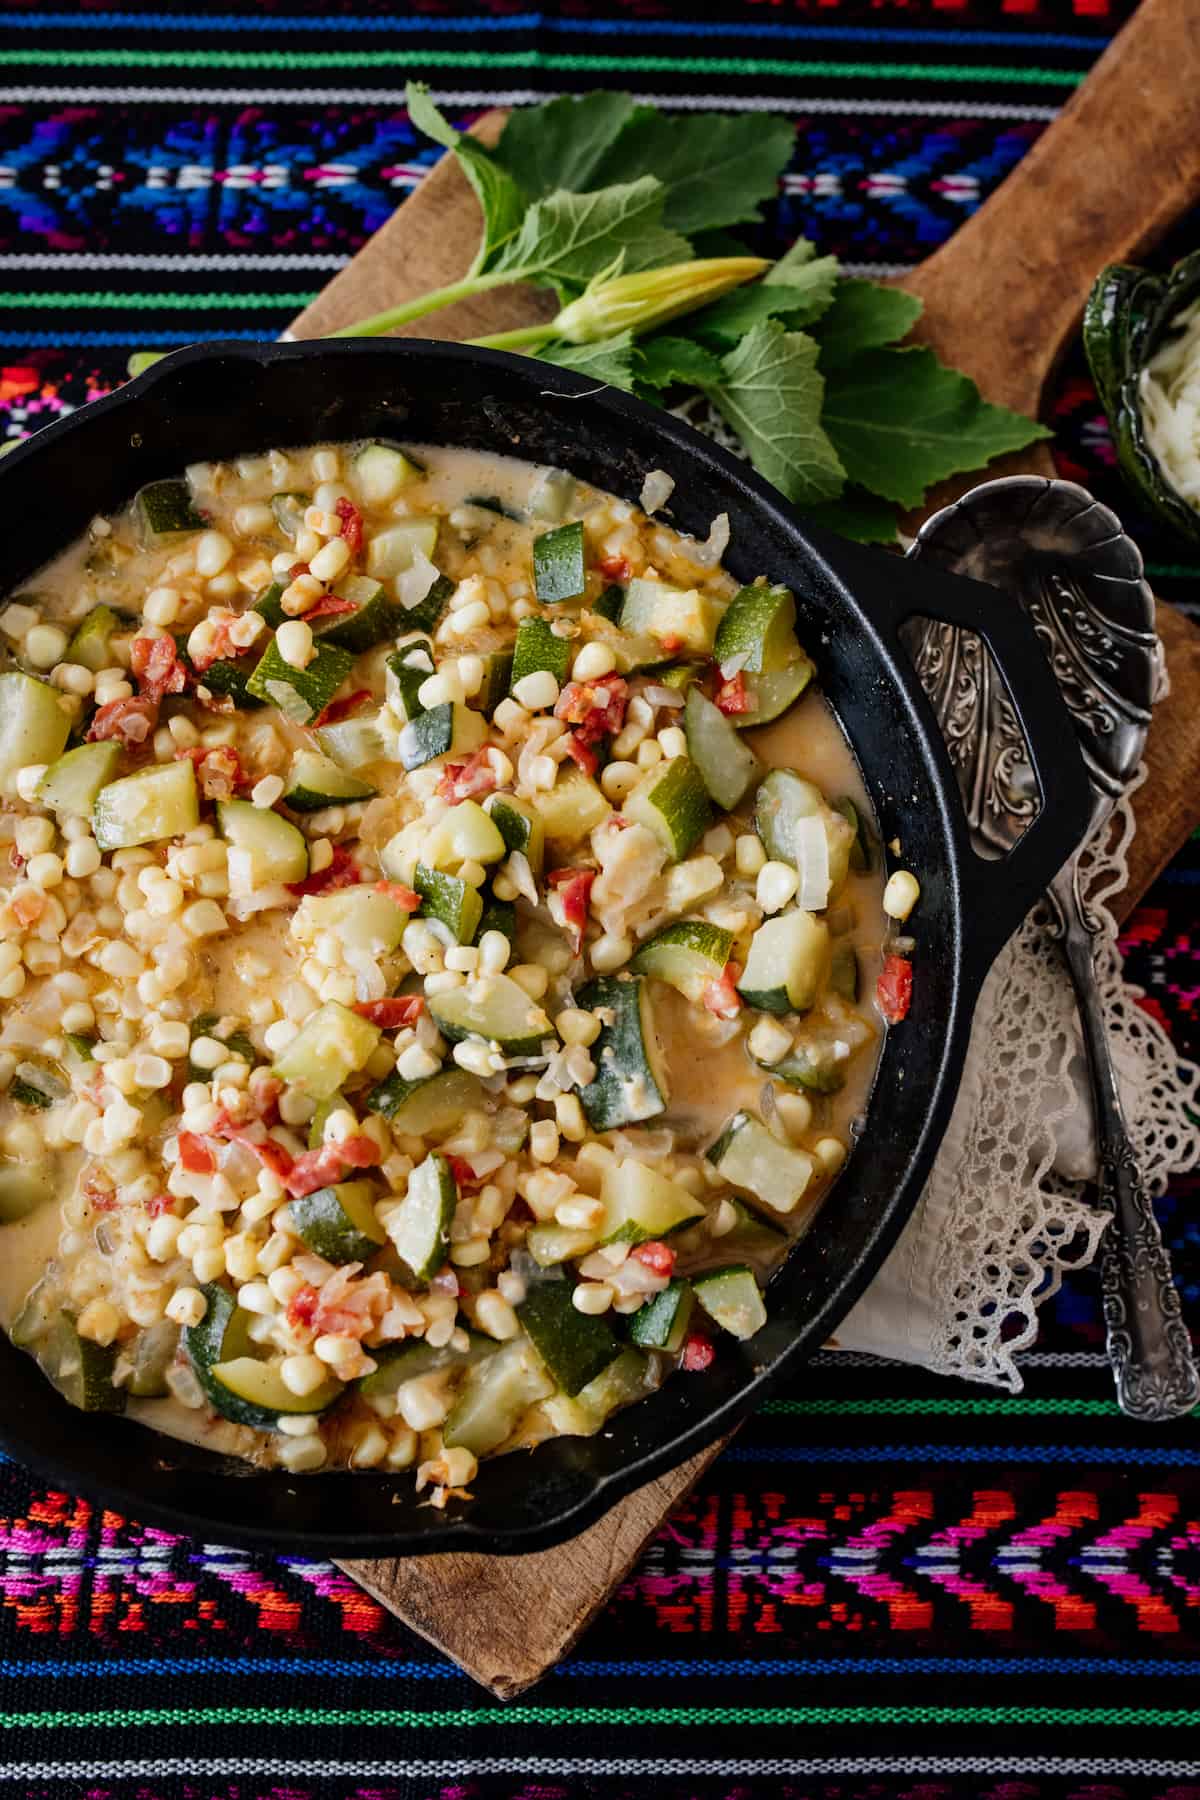 Calabacitas con Elote or Zucchini with Corn ready and served in an iron skillet on a colorful runner